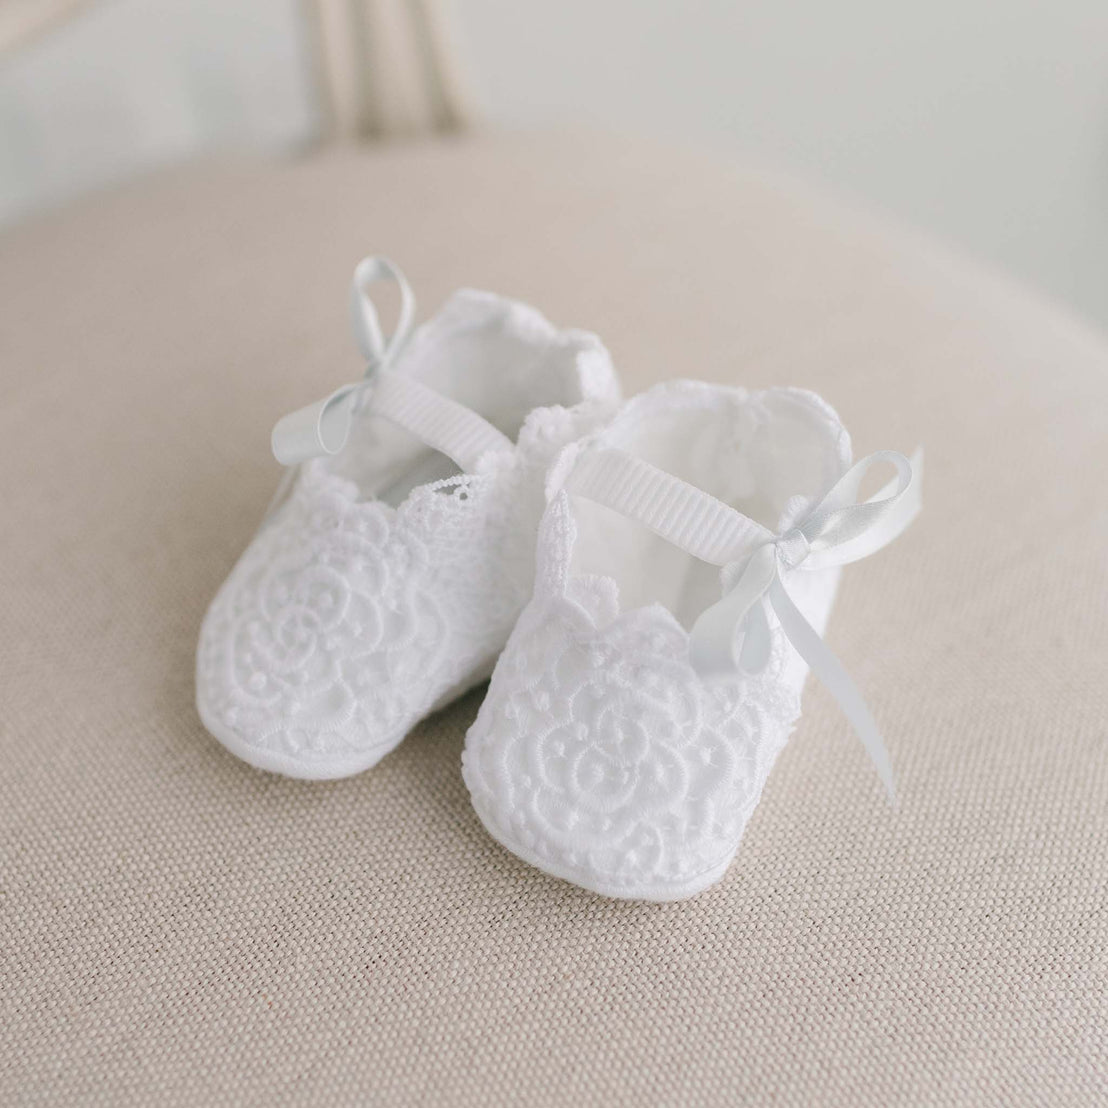 A pair of tiny, white Olivia Booties with lace details and satin ribbons, placed neatly on a soft beige surface for a christening.